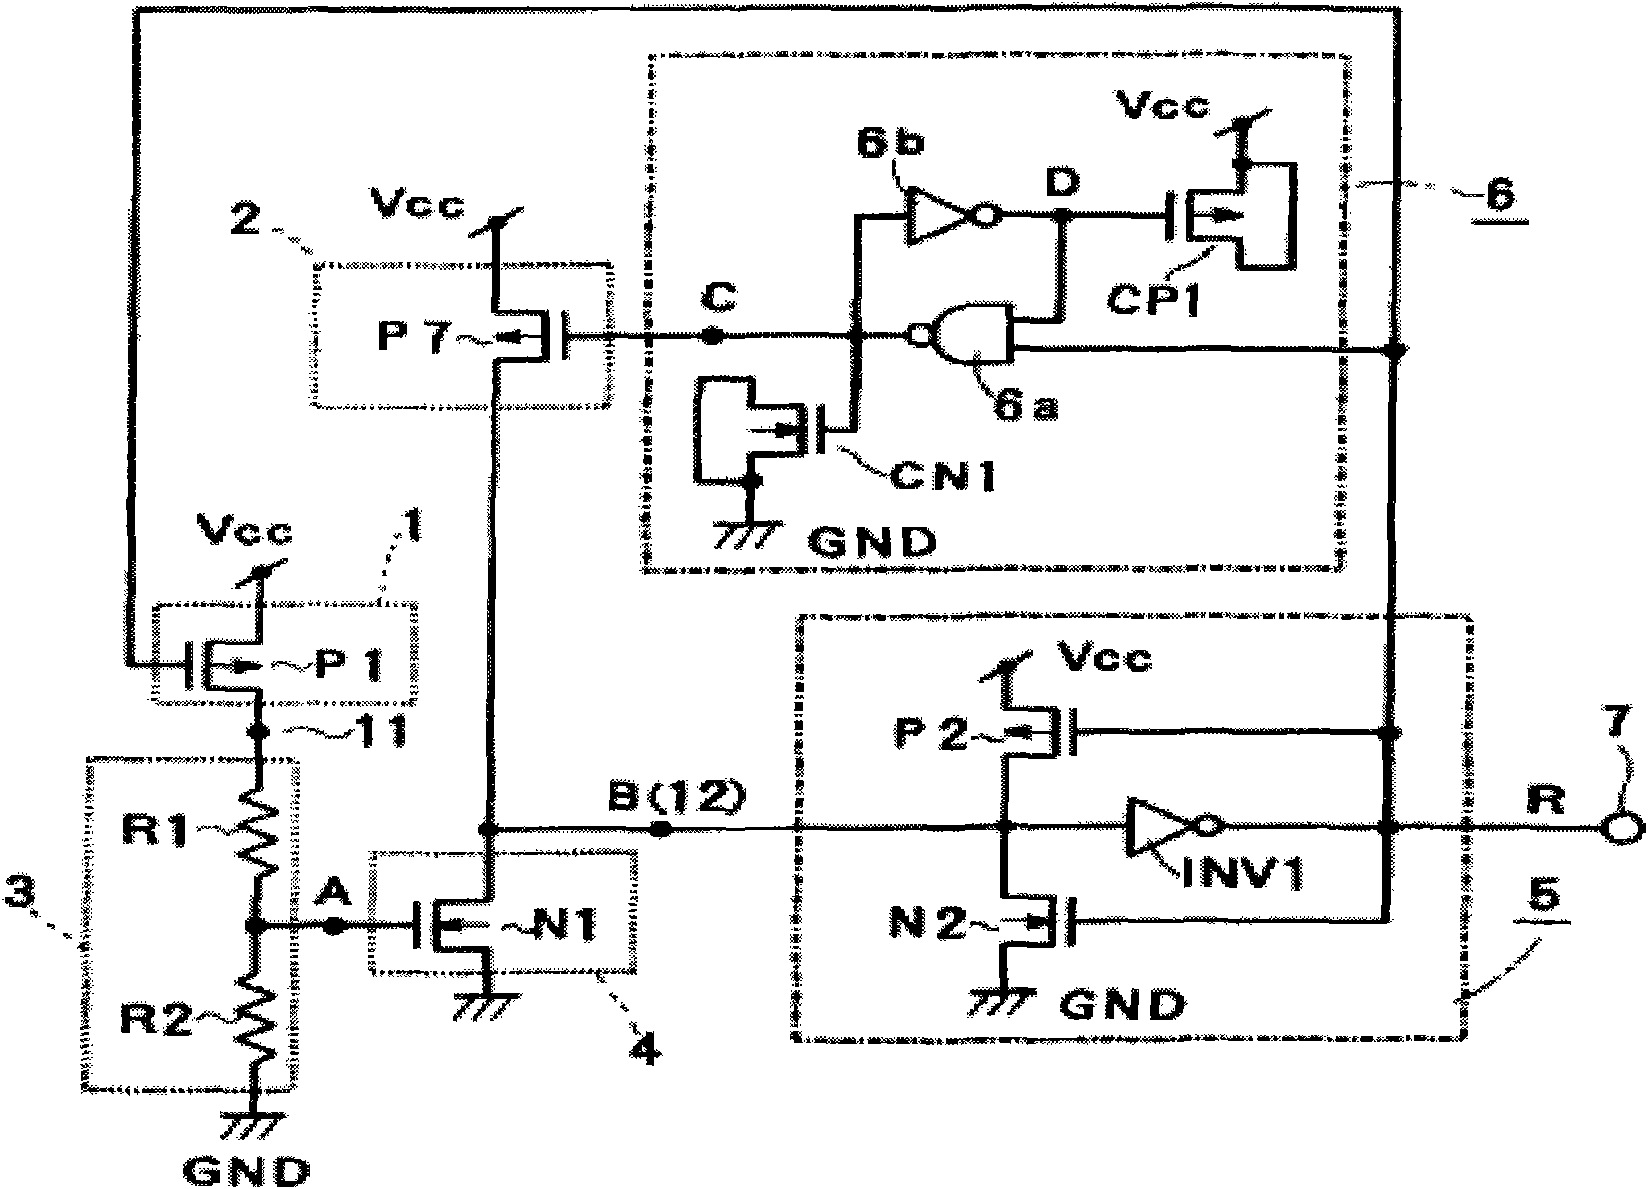 Chip power-on reset circuit